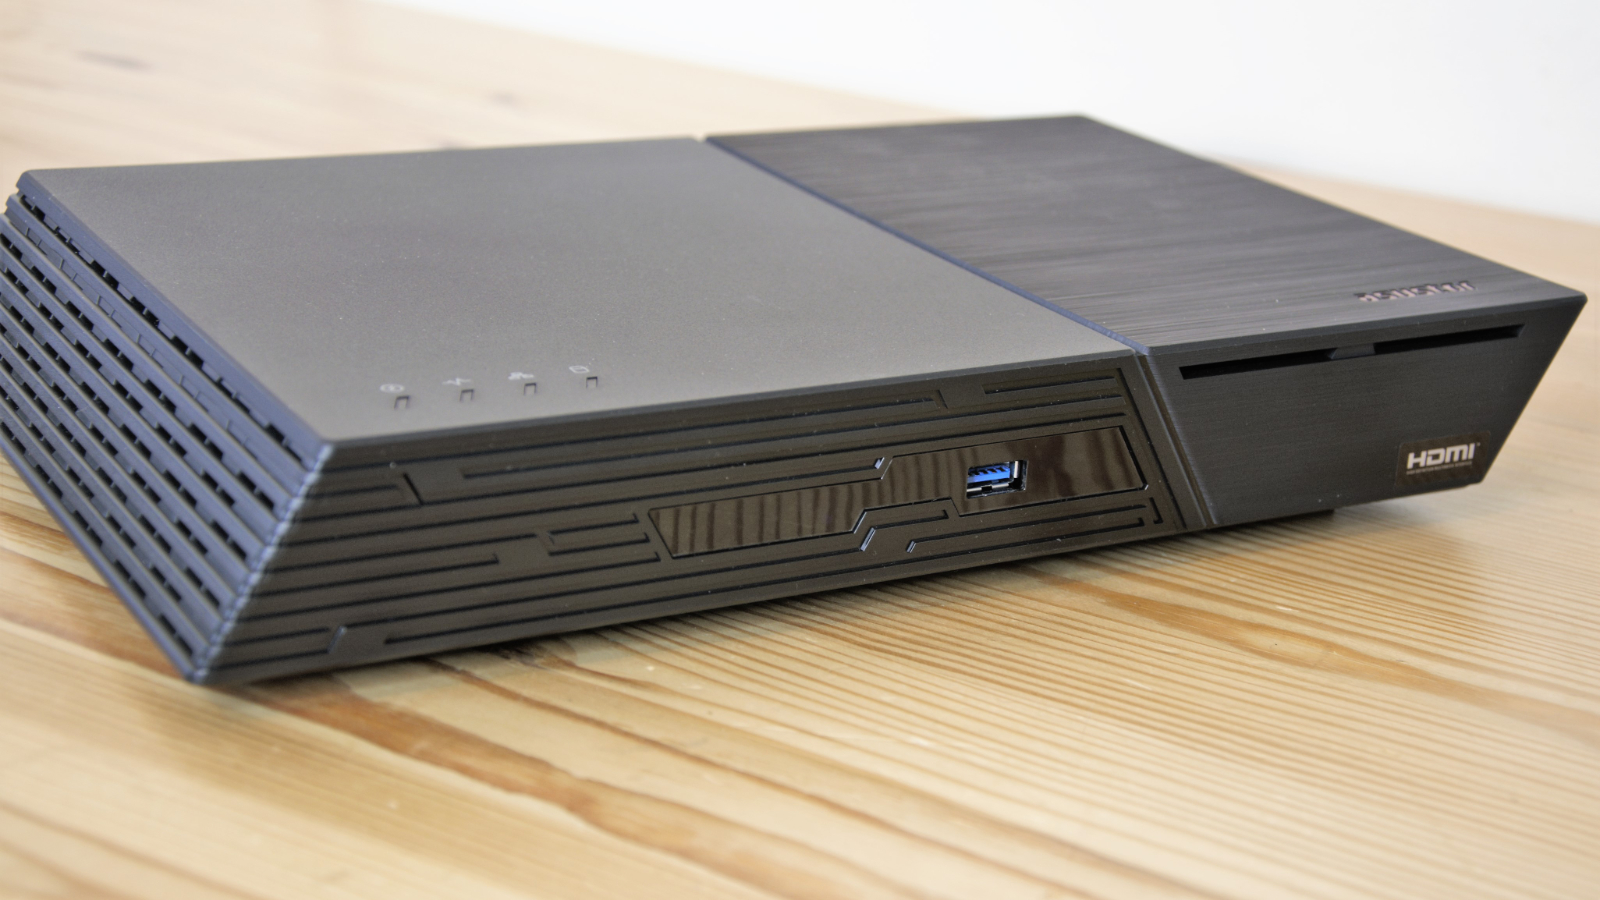 Asustor Flashstor 6 FS6706T review: A NAS for NVMe drives